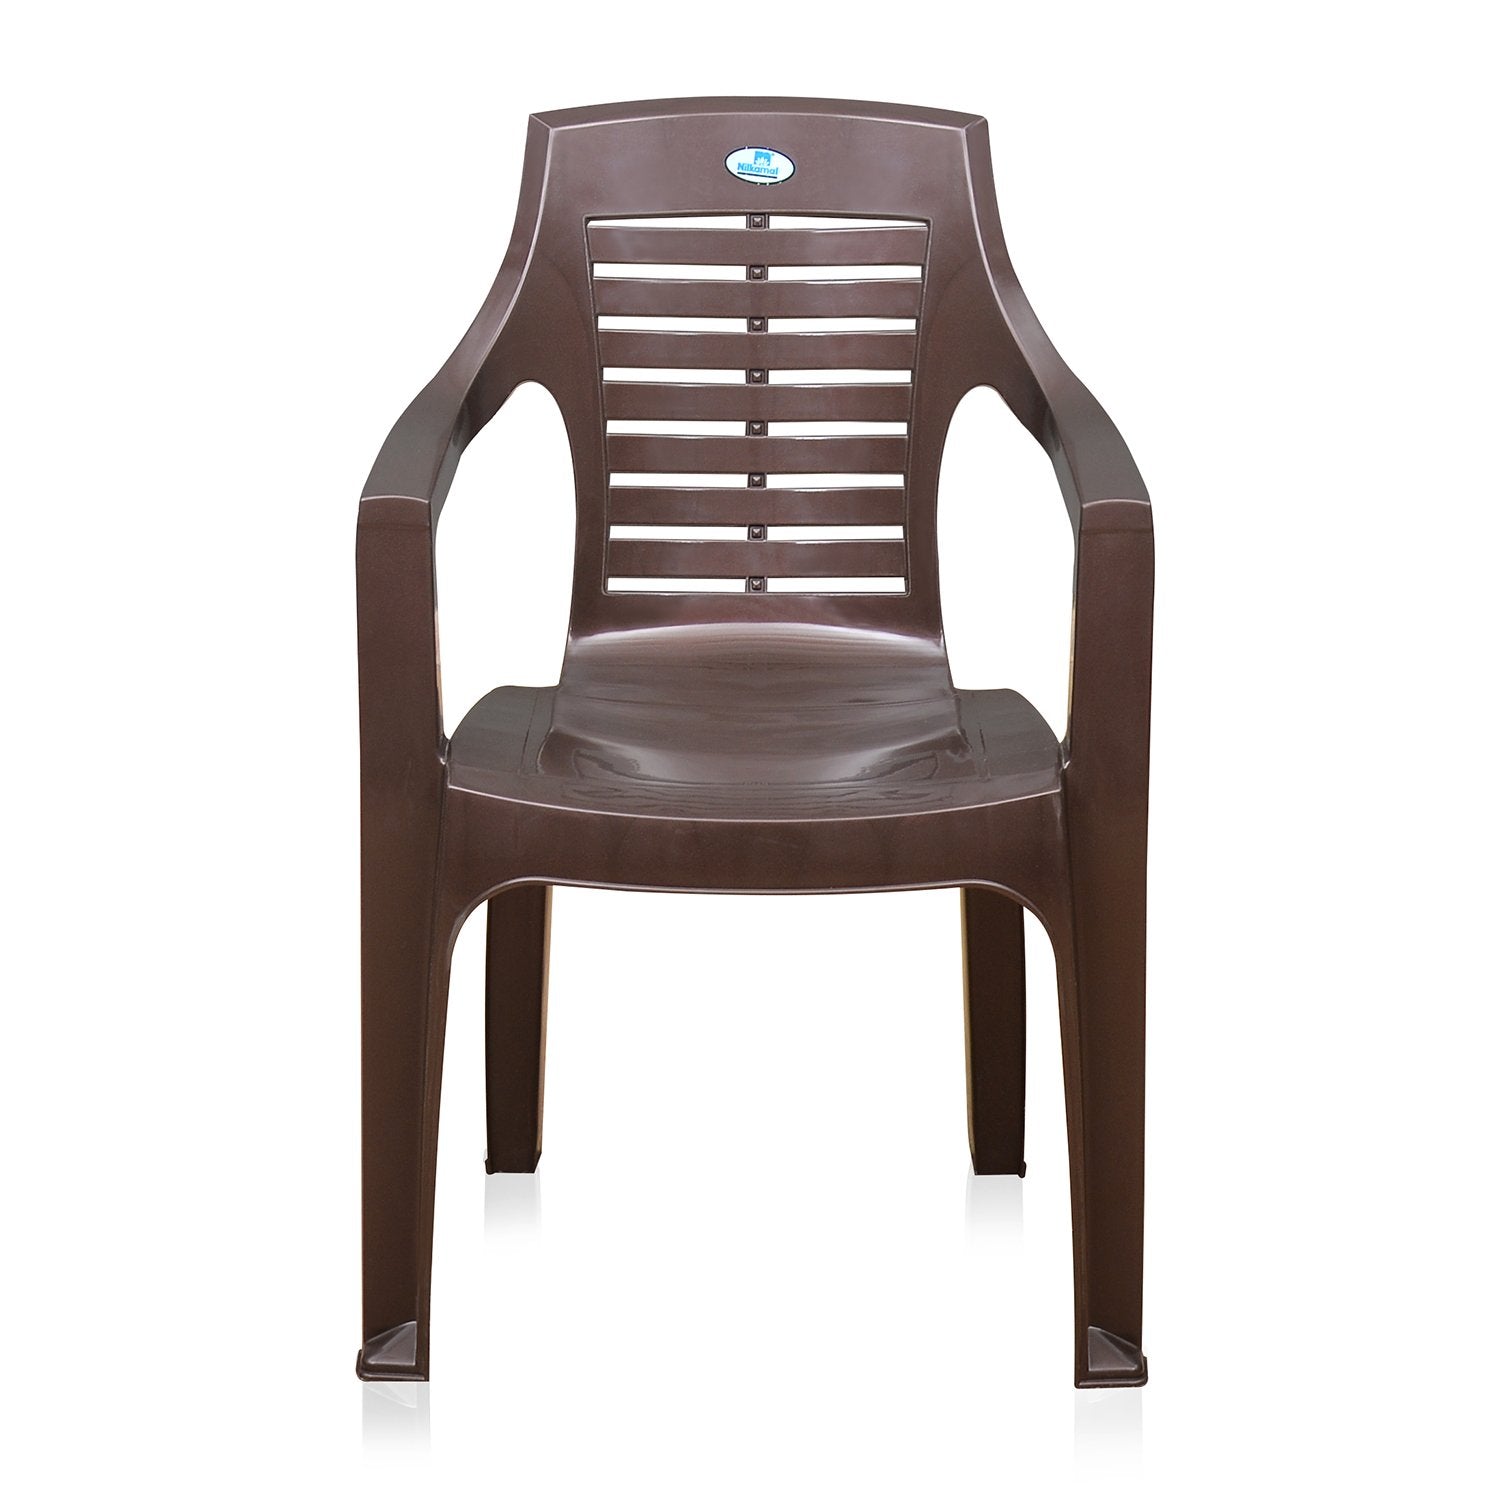 Nilkamal CHR 6020 Mid Back Chair with Arm (Weather Brown)